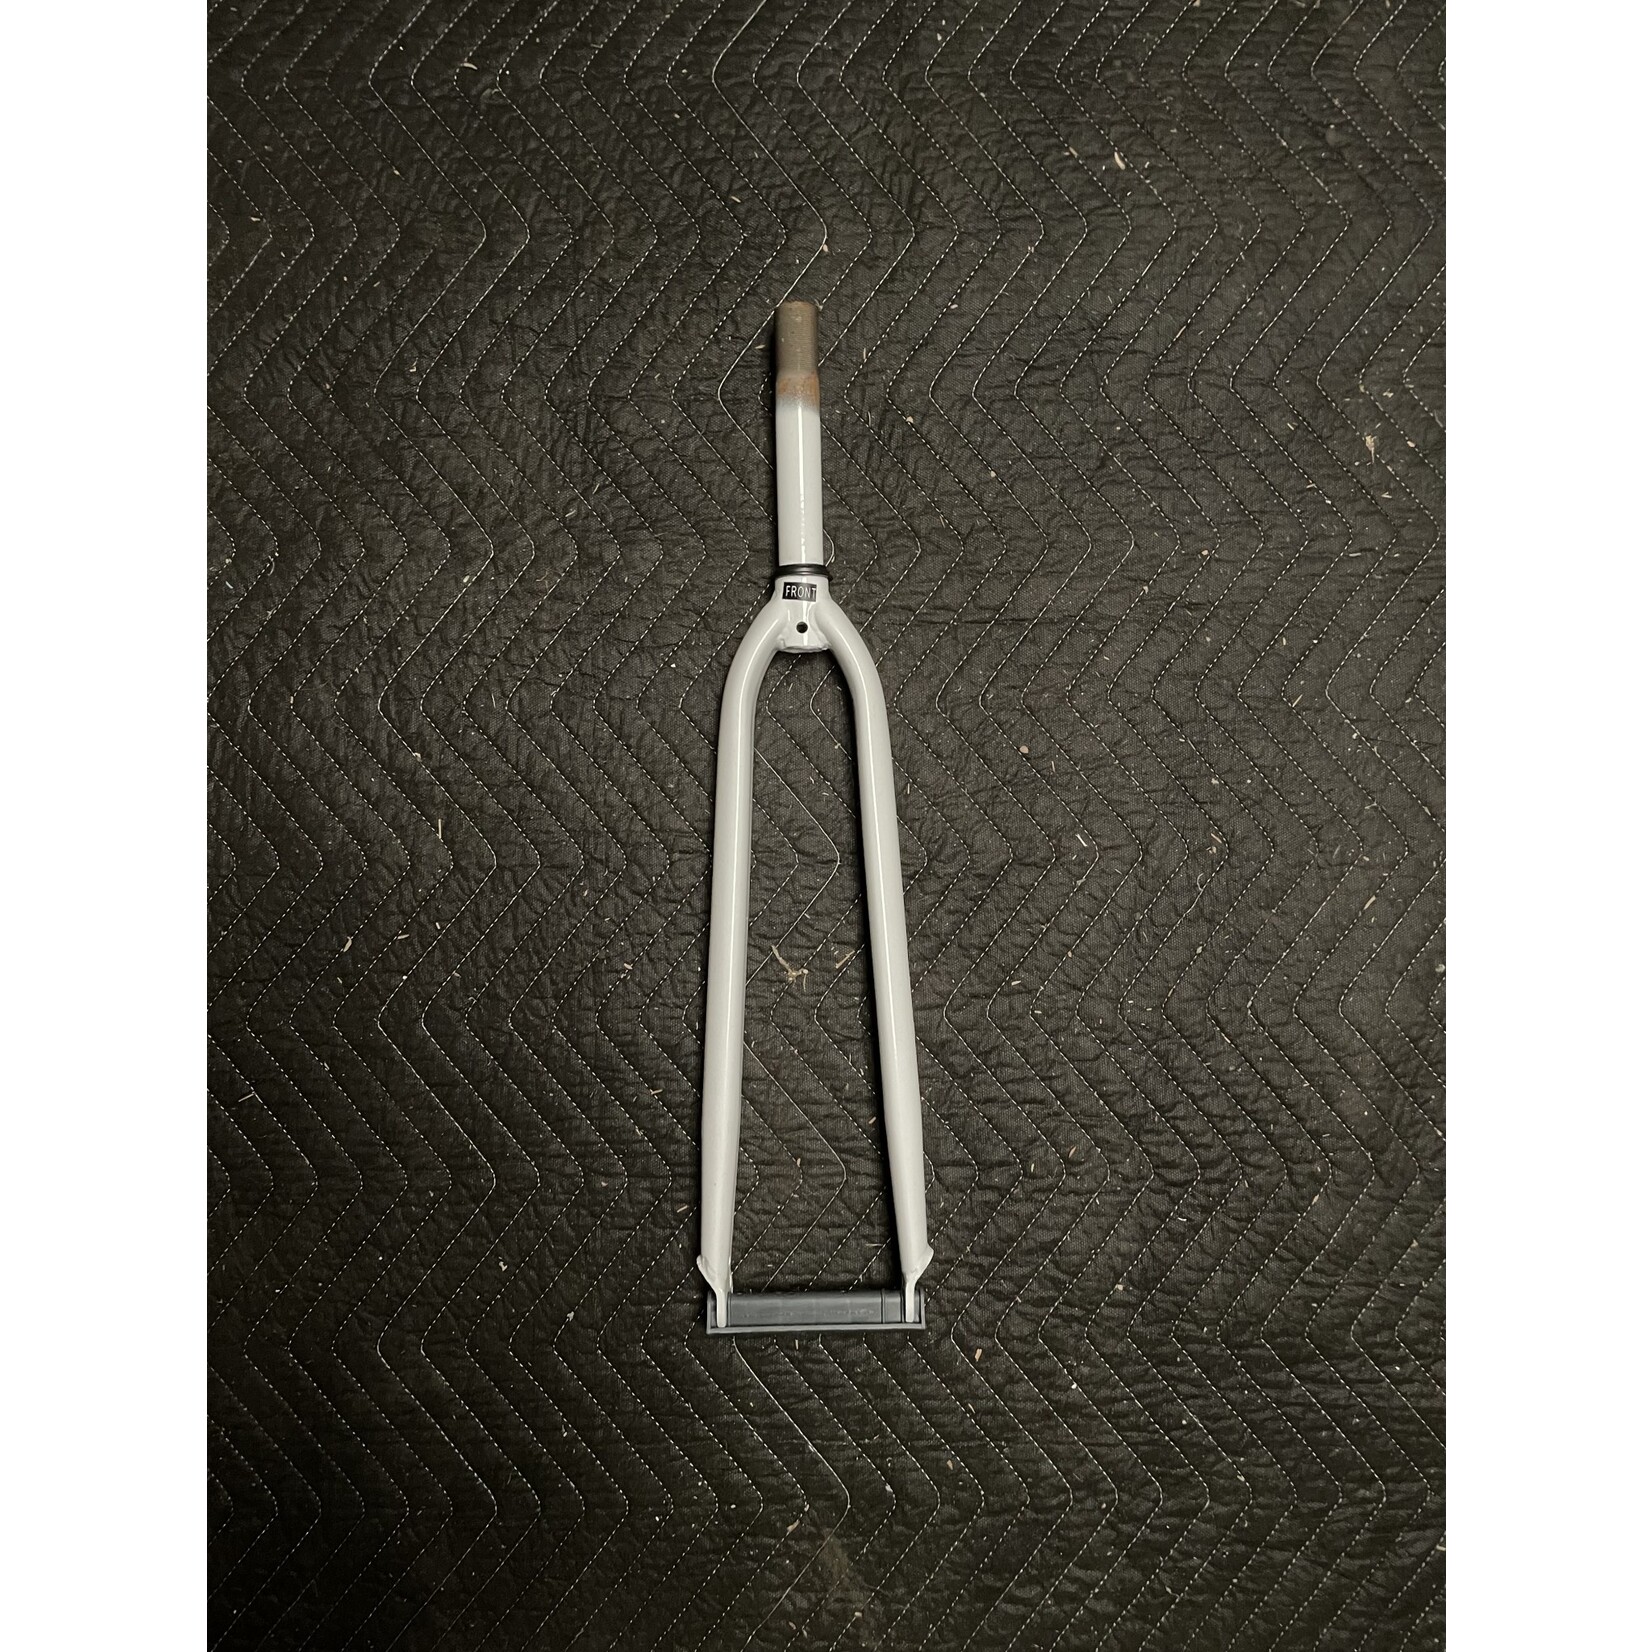 Sequence 1” x 6” Threaded 700C Bicycle Fork (White)